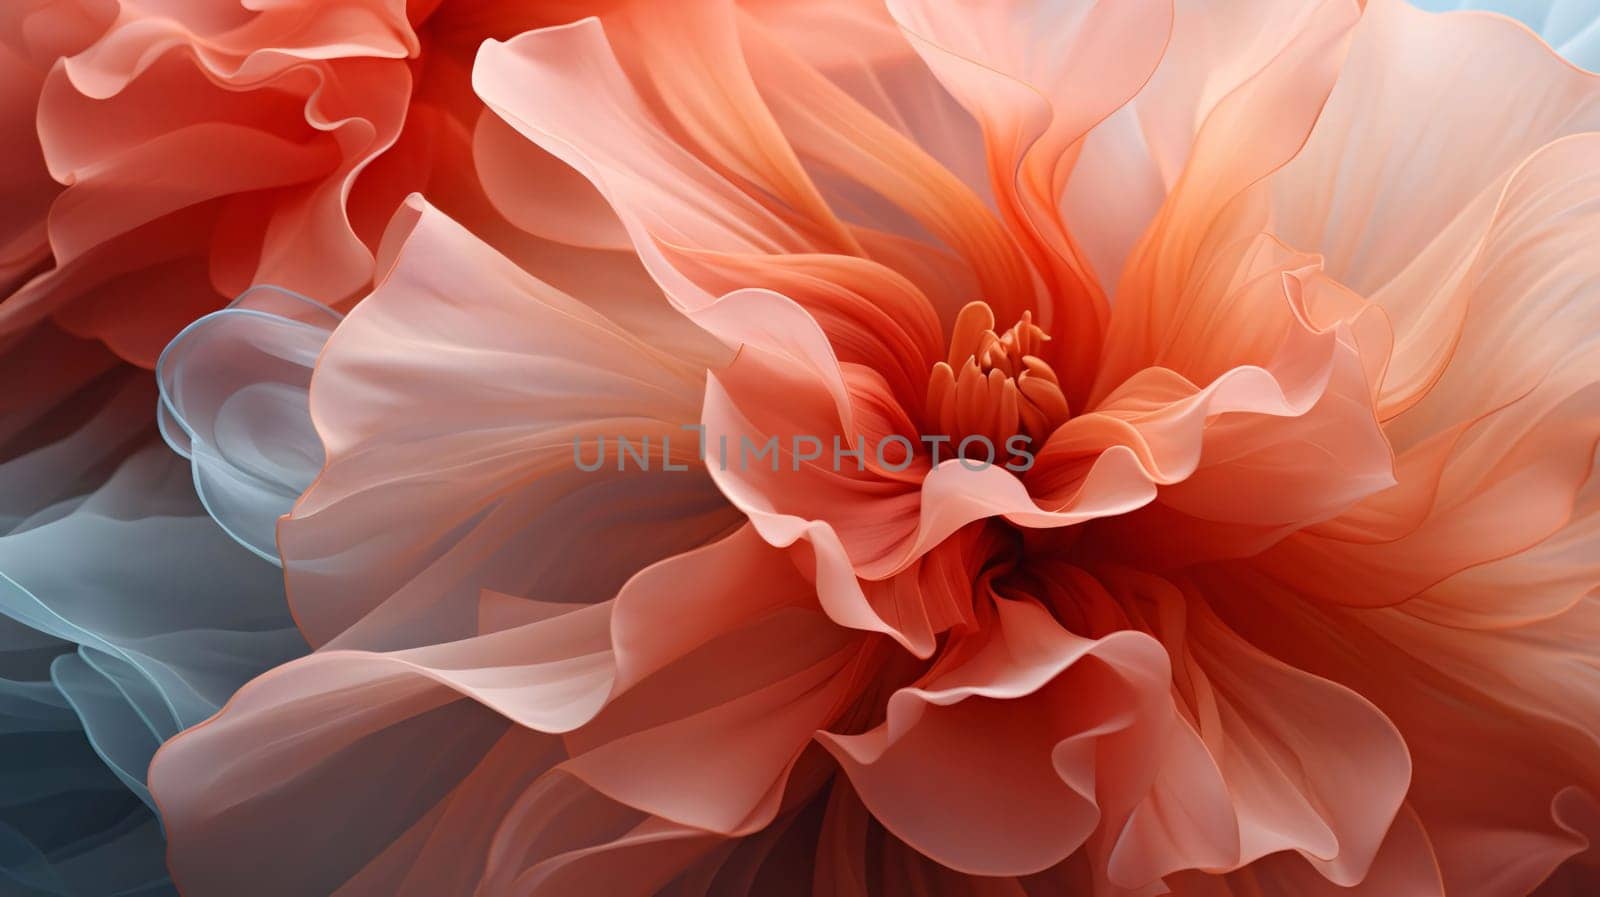 Close-up on orange red, petals of a flower. Flowering flowers, a symbol of spring, new life. by ThemesS